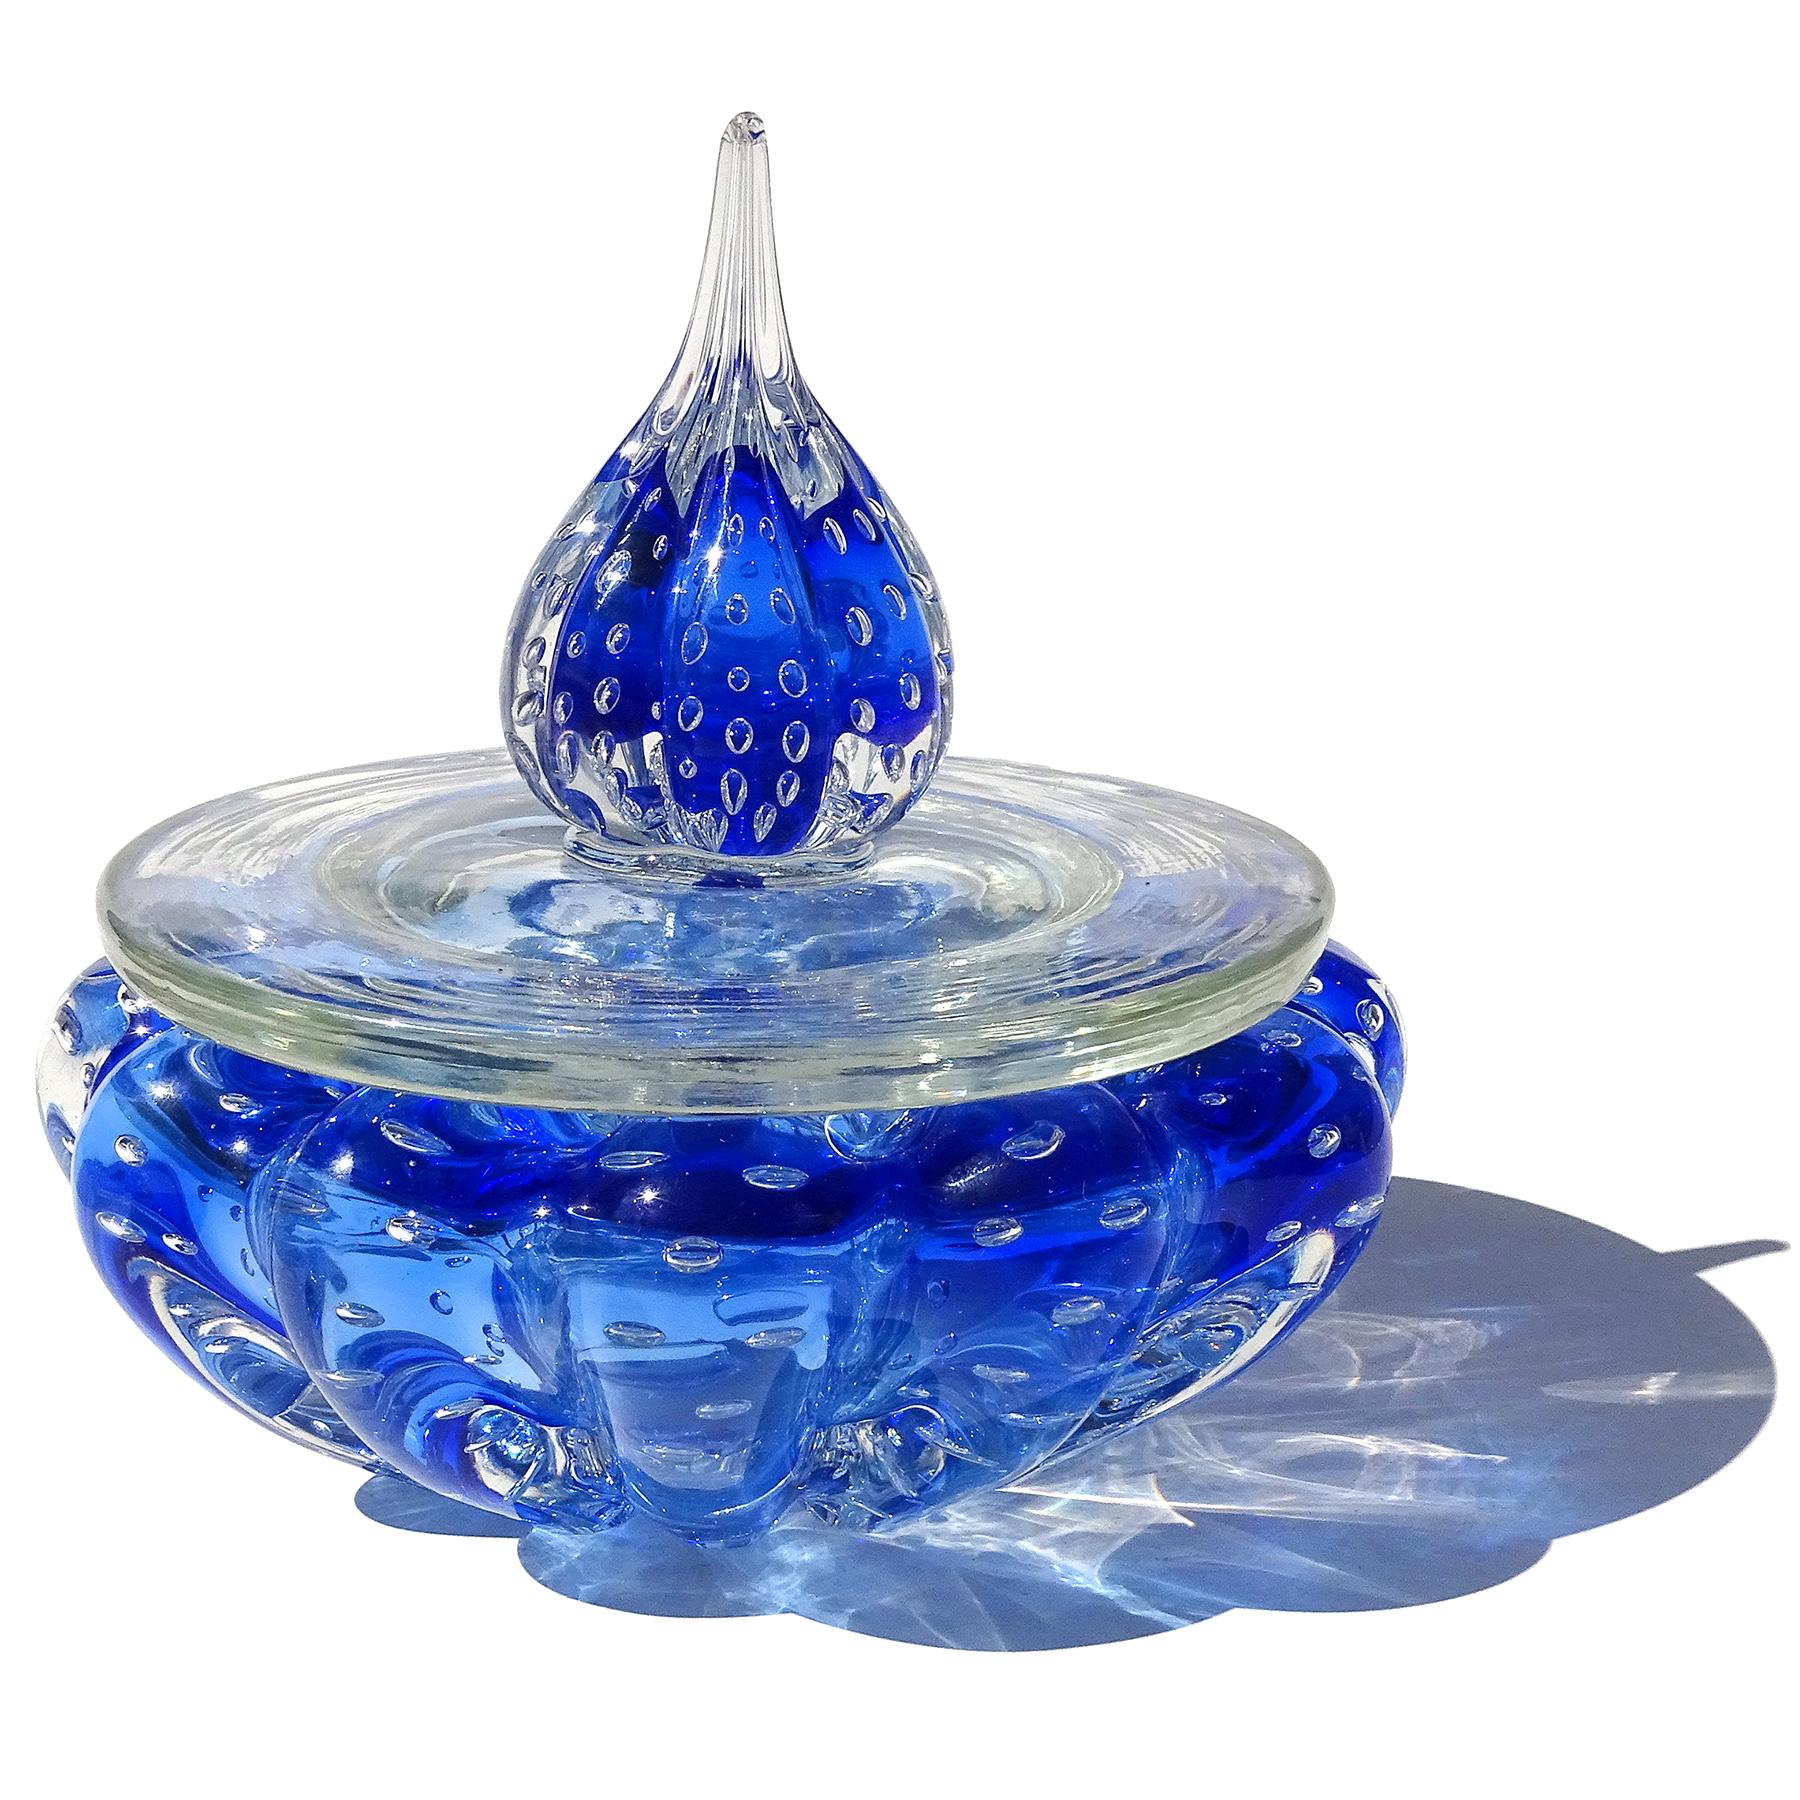 Beautiful vintage Murano hand blown Sommerso sapphire blue and bubbles Italian art glass lidded vanity dresser jar. The piece has a ribbed body, with large clear lid and spike topper. Made in the 